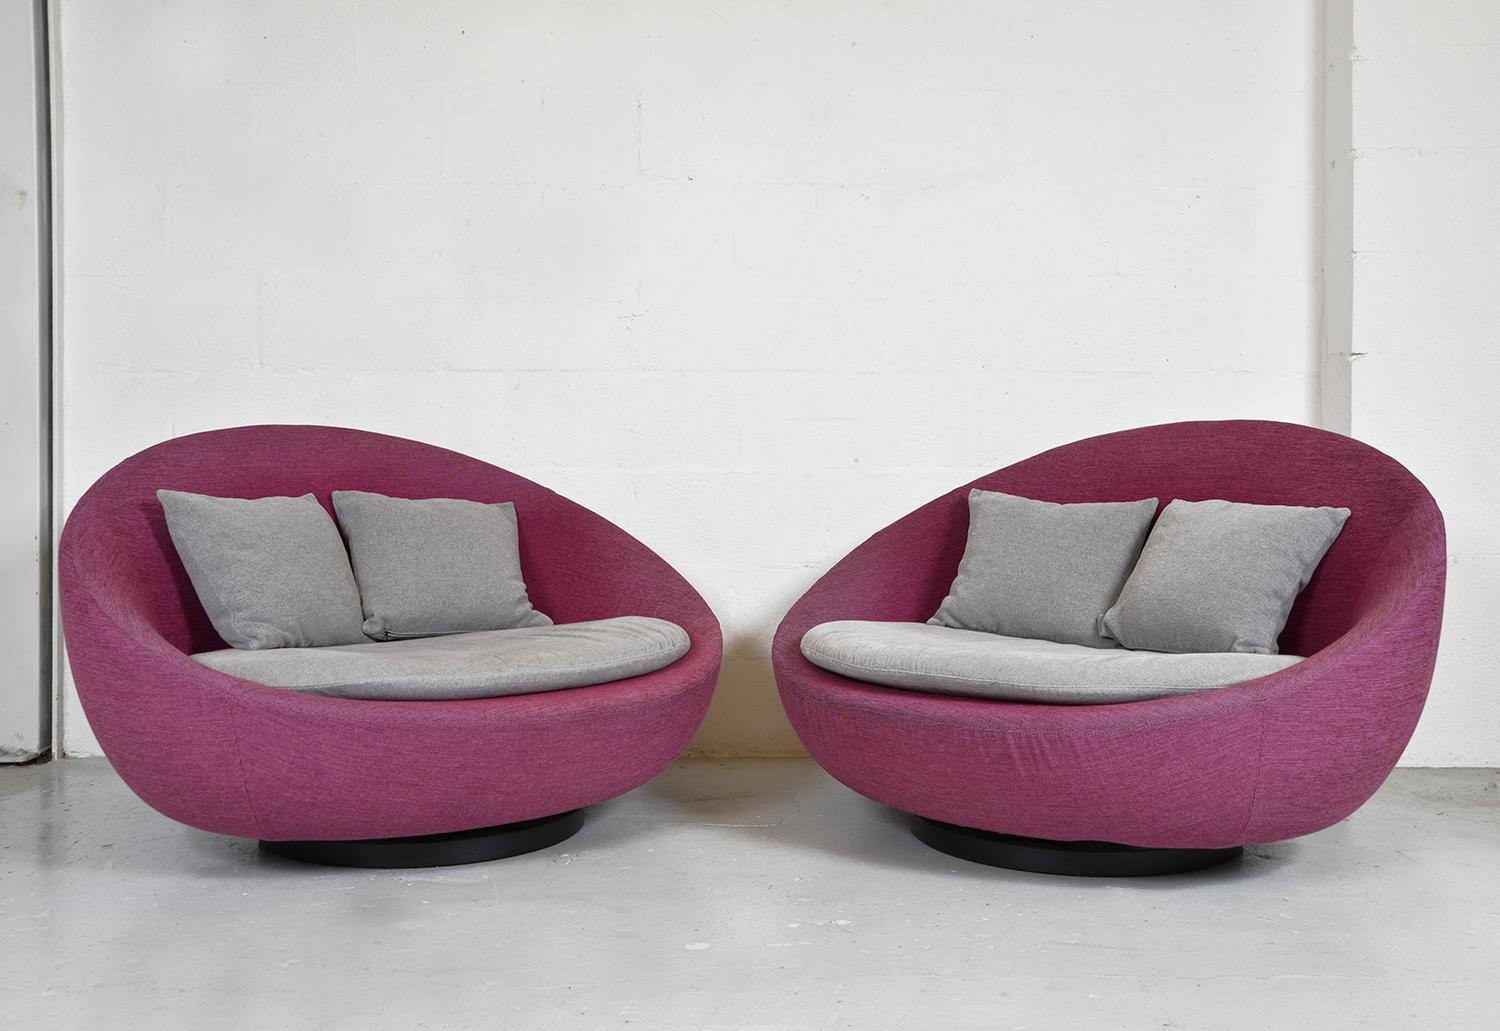 Pair comfy Lacoon swivel love seats designed by Jai Jalan and made by Désirée, Italy. Each couch has a metal and solid wood oval frame which swivels effortlessly on a circular metal base. 
Both couches have the original two-tone loose covers in a